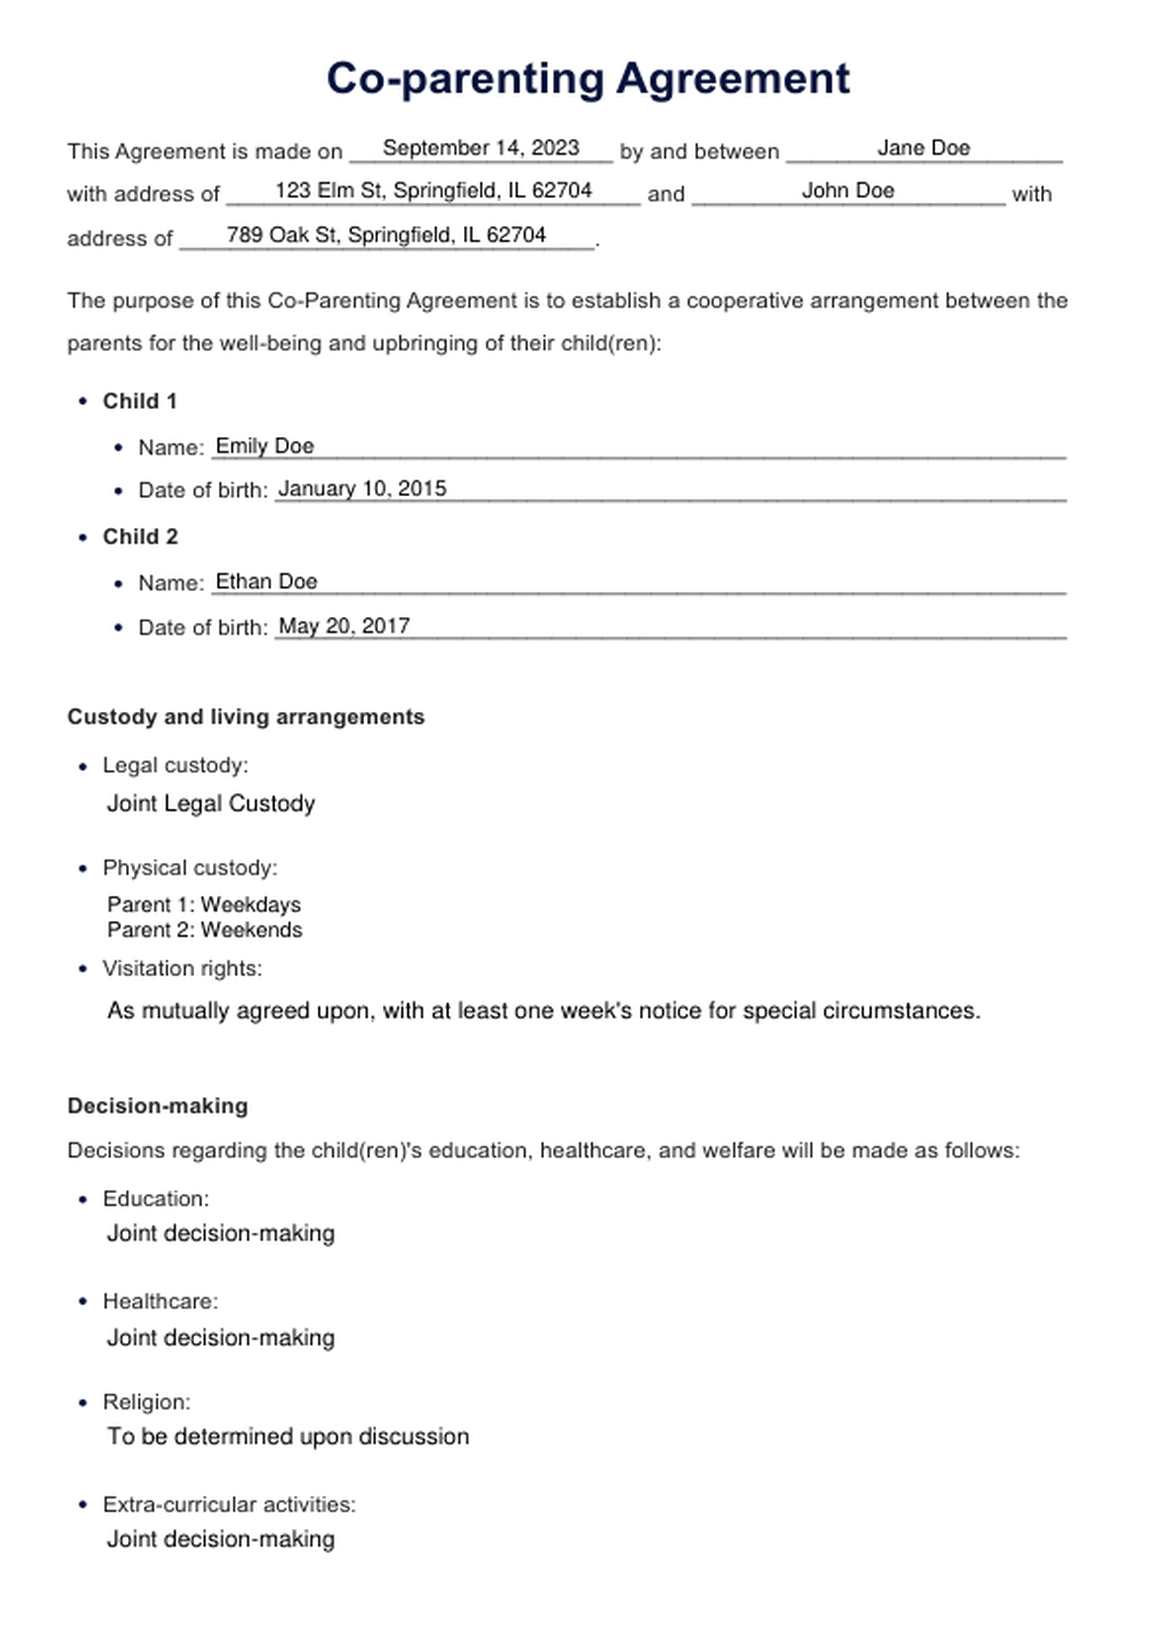 Co-Parenting Agreement Templates PDF Example